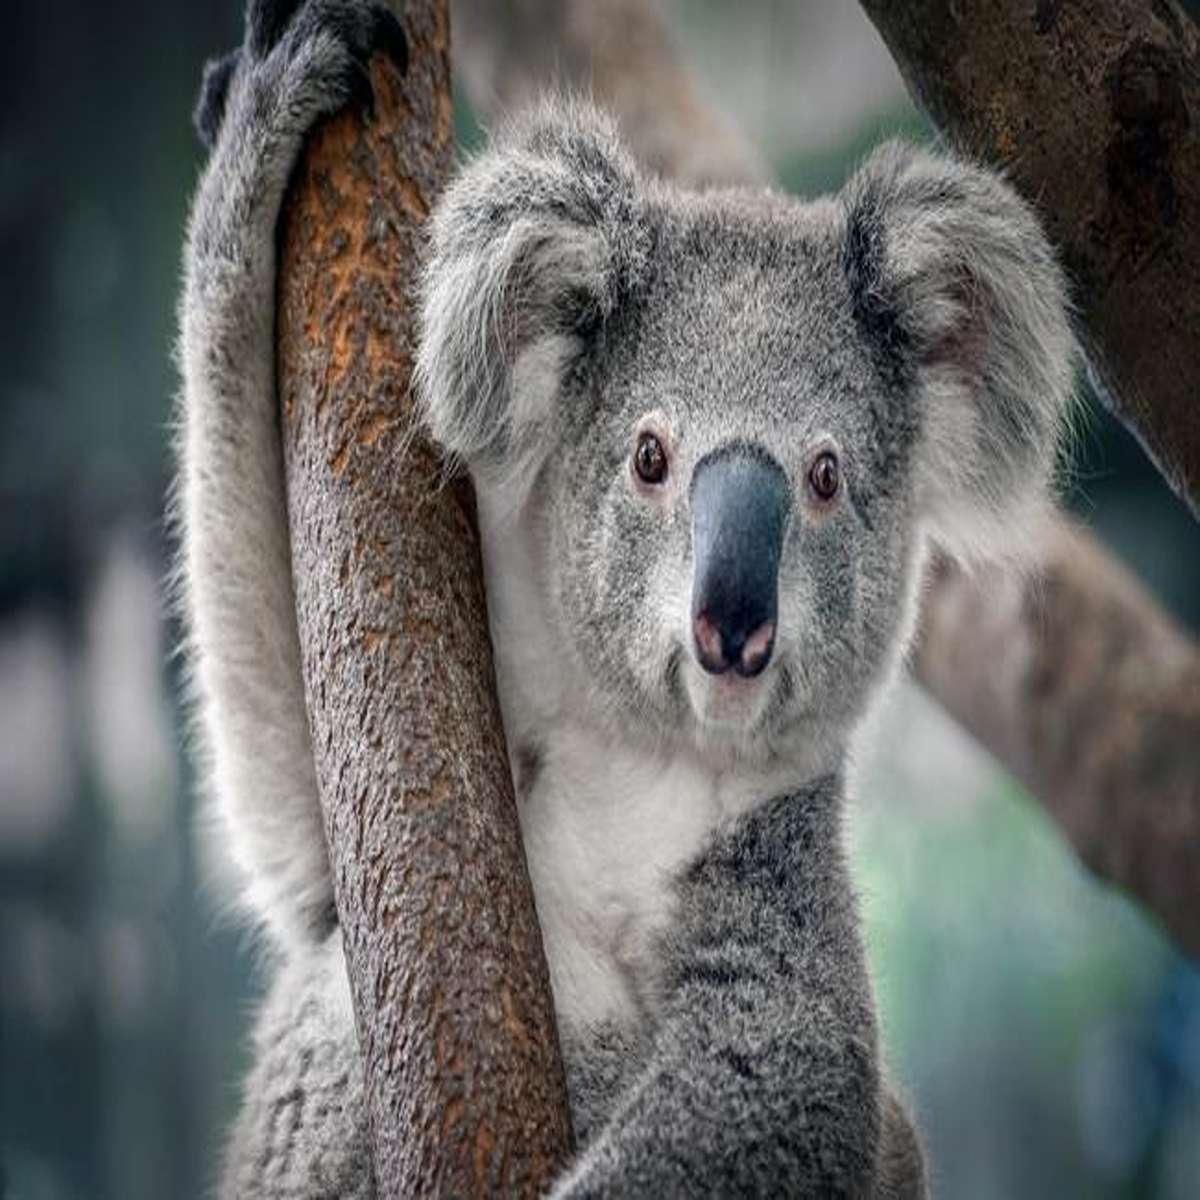 Koalas actually have fingerprints and they're very similar to humans'. They also have chlamydia.